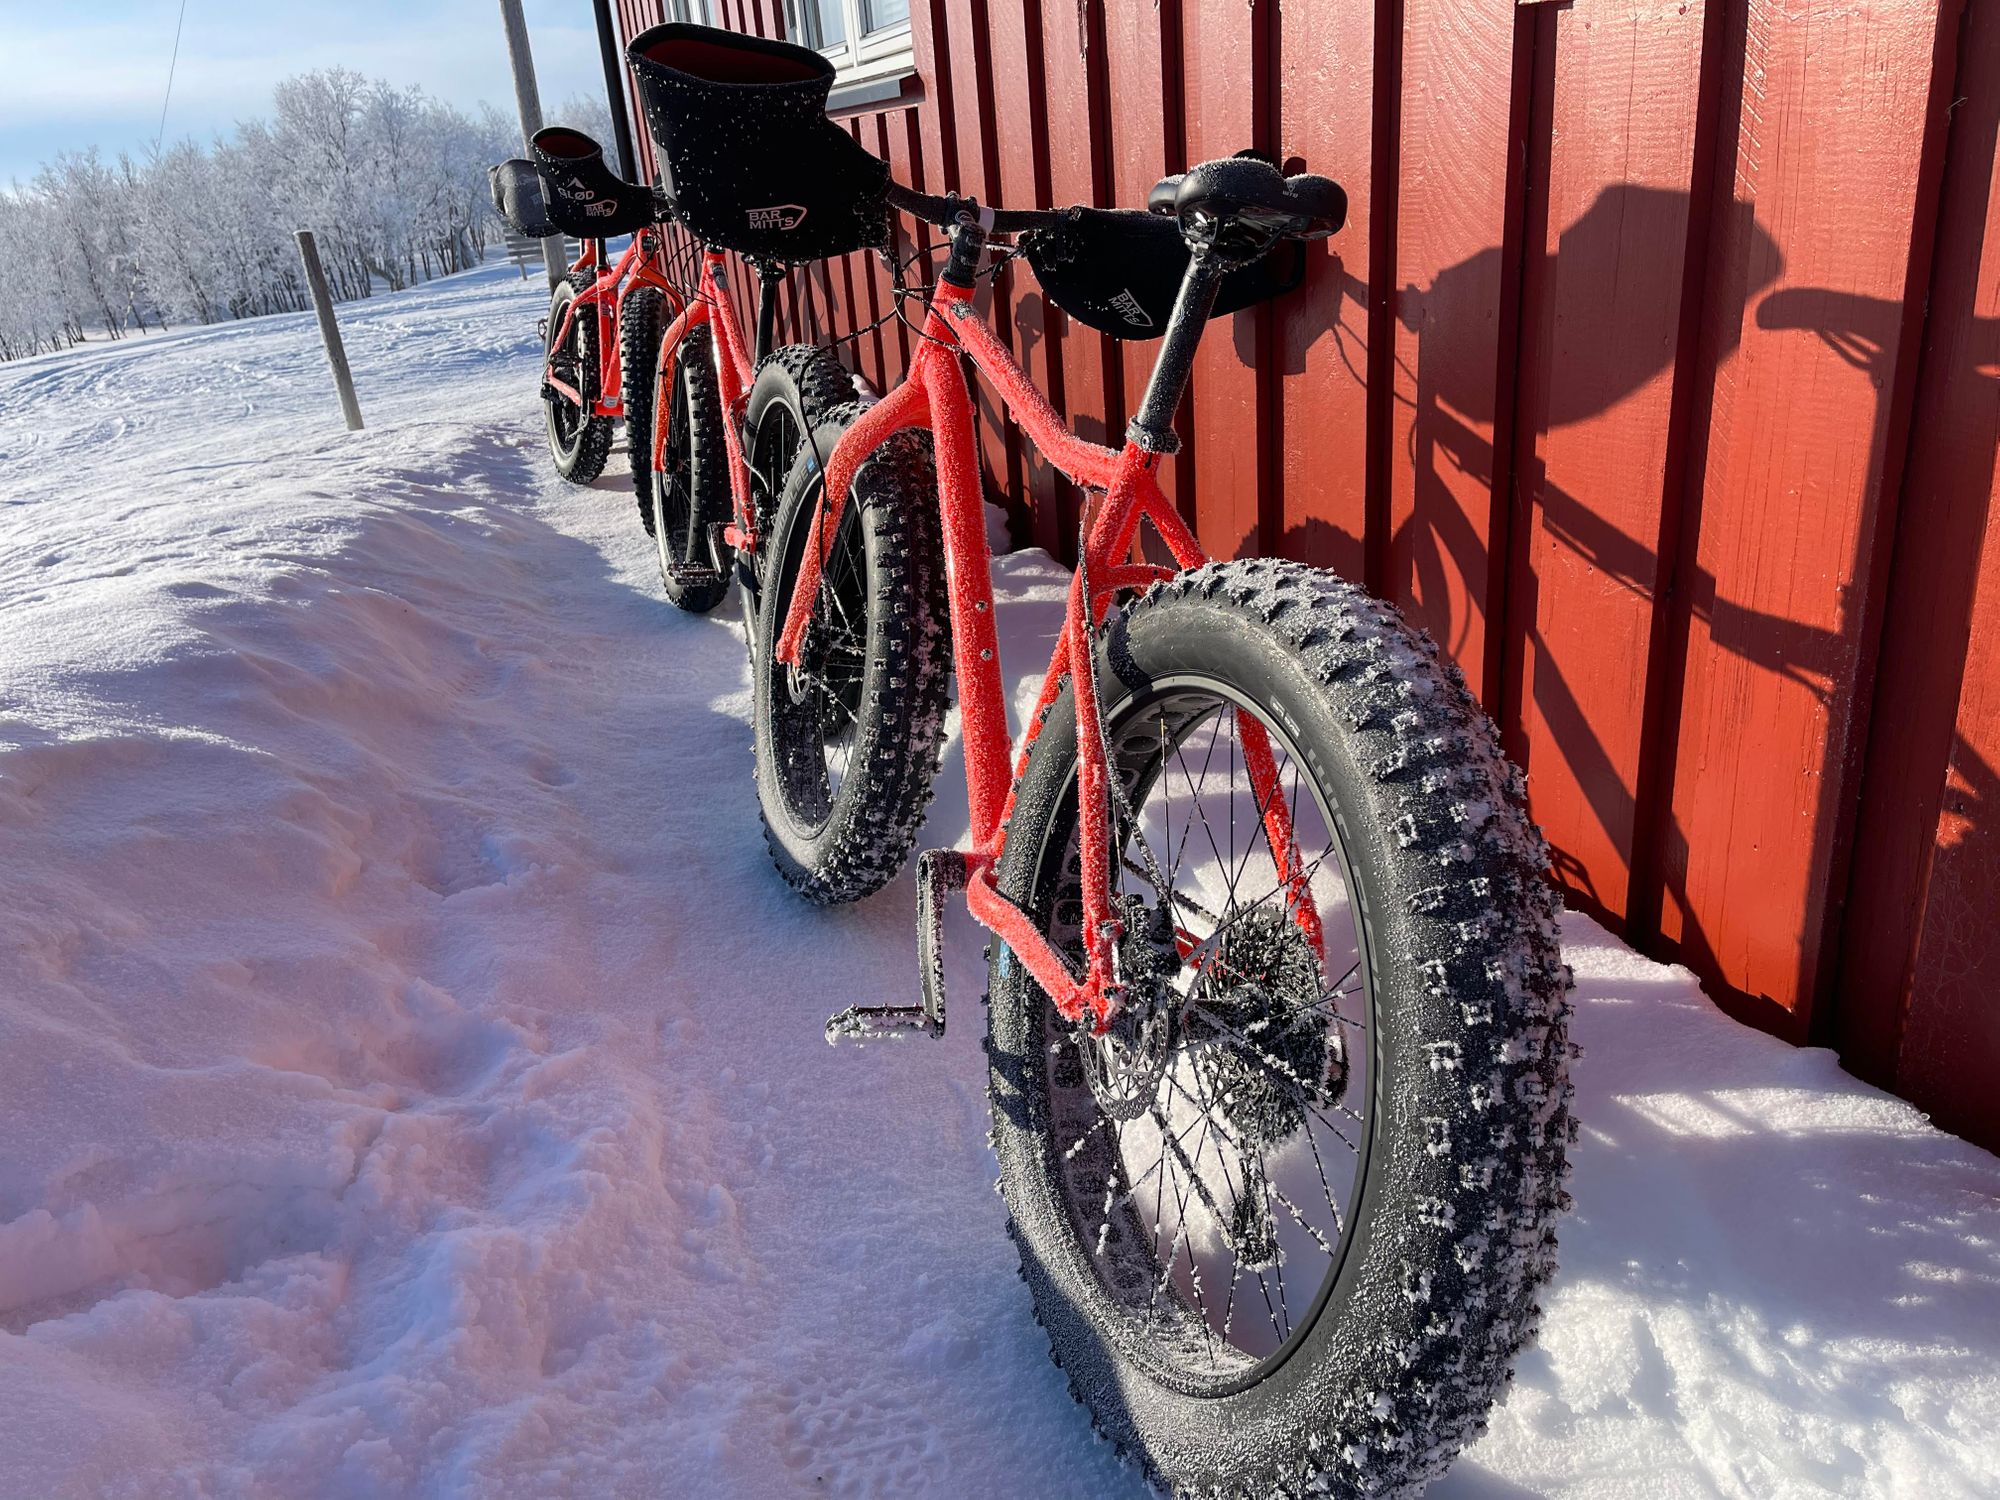 Fat bikes leaning against a red building in the snowy Arctic